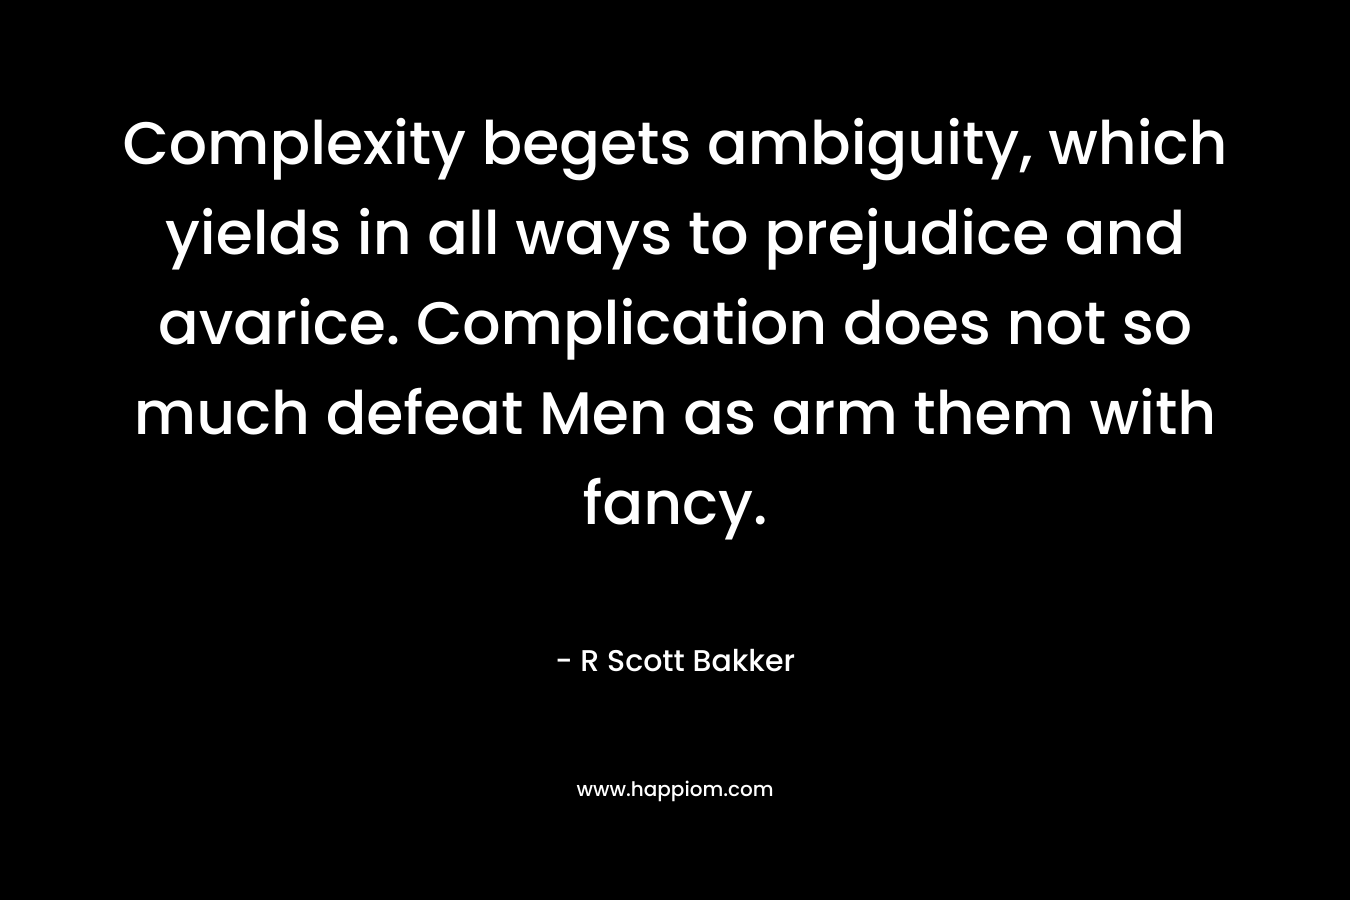 Complexity begets ambiguity, which yields in all ways to prejudice and avarice. Complication does not so much defeat Men as arm them with fancy. – R Scott Bakker